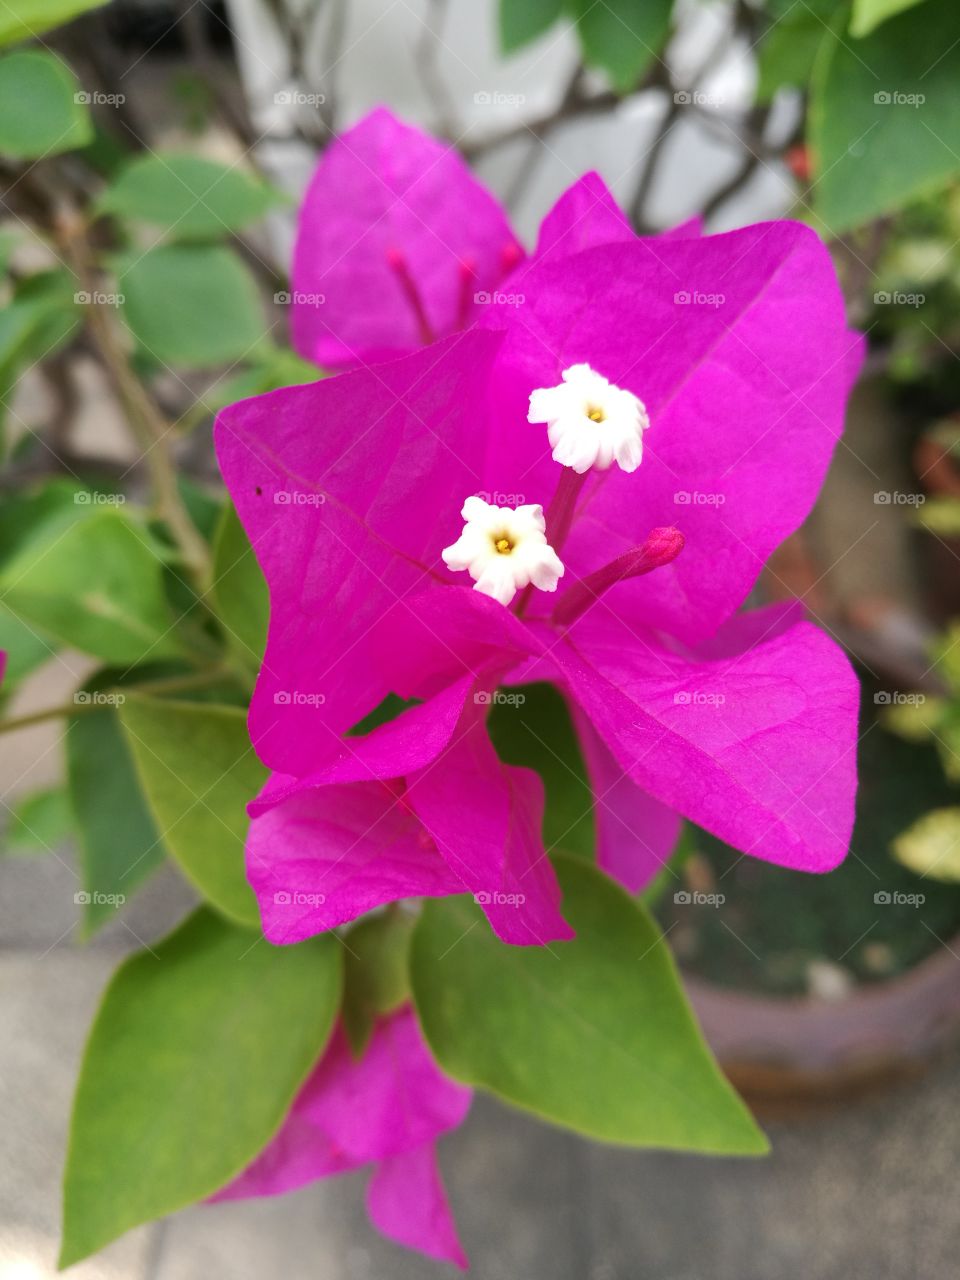 Closeup of pink bougainvillea with tiny white flowers.